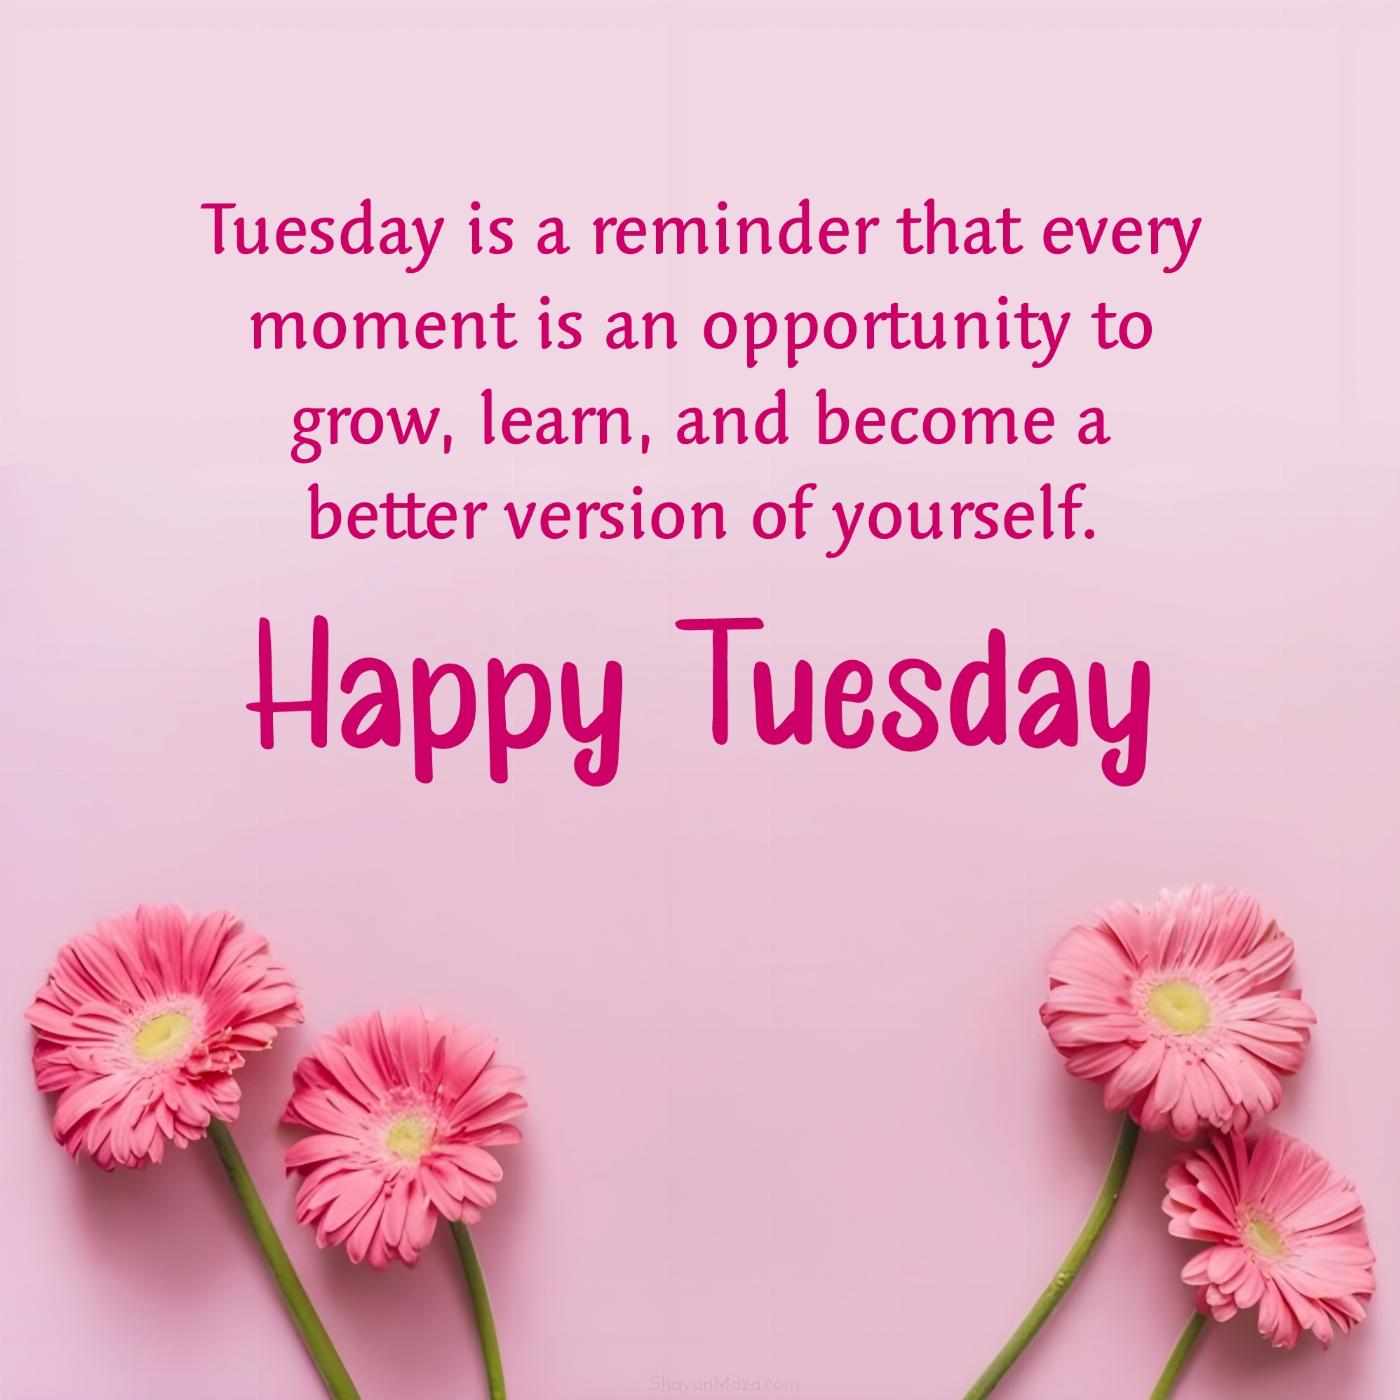 Tuesday is a reminder that every moment is an opportunity to grow